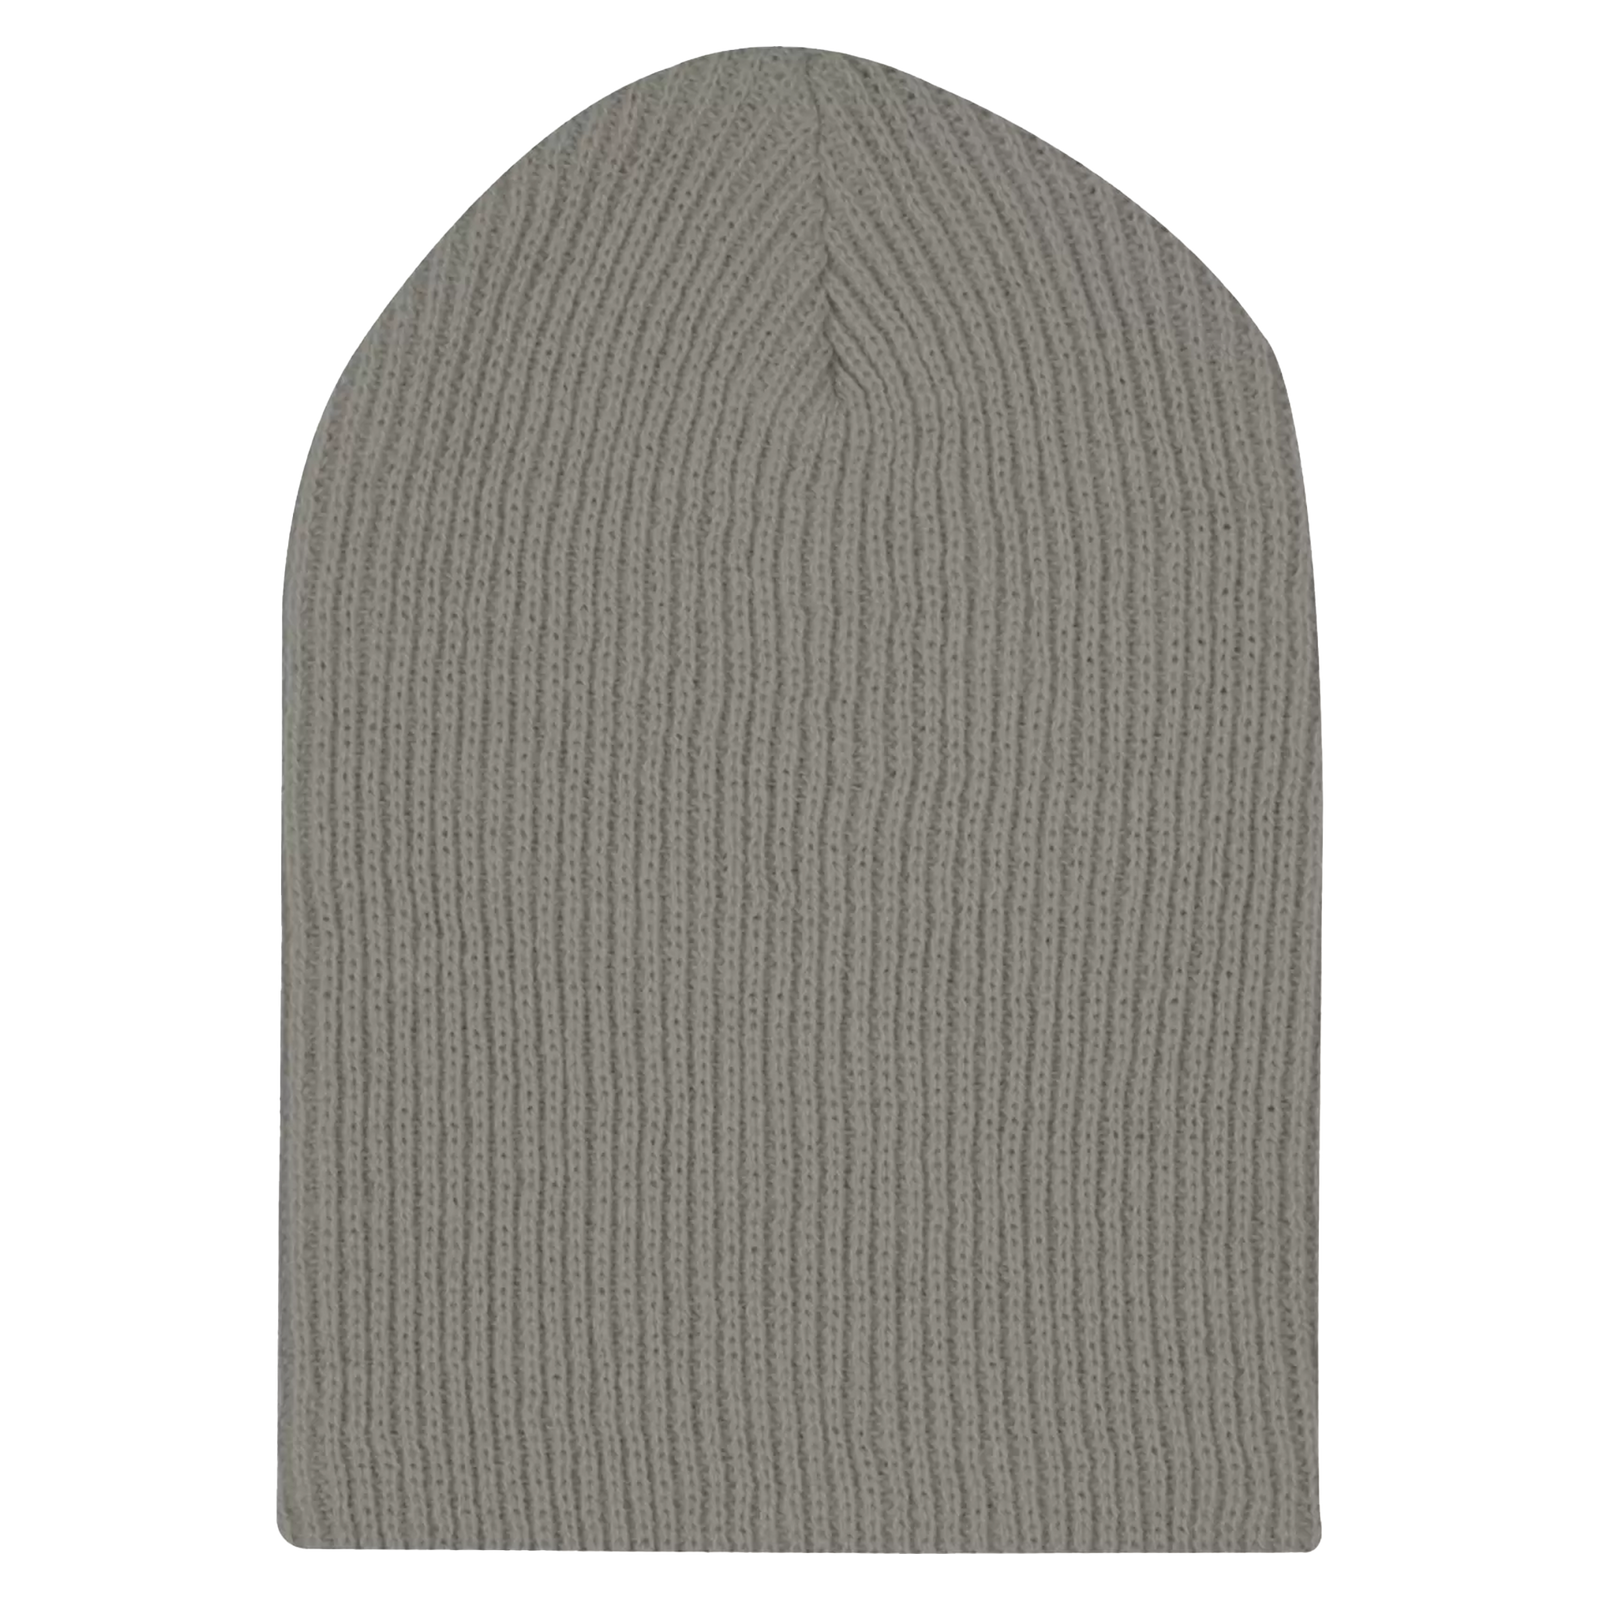 ATC Everyday Rib Knit Slouch Beanie - Adult Unisex One Size Fits All - Charcoal